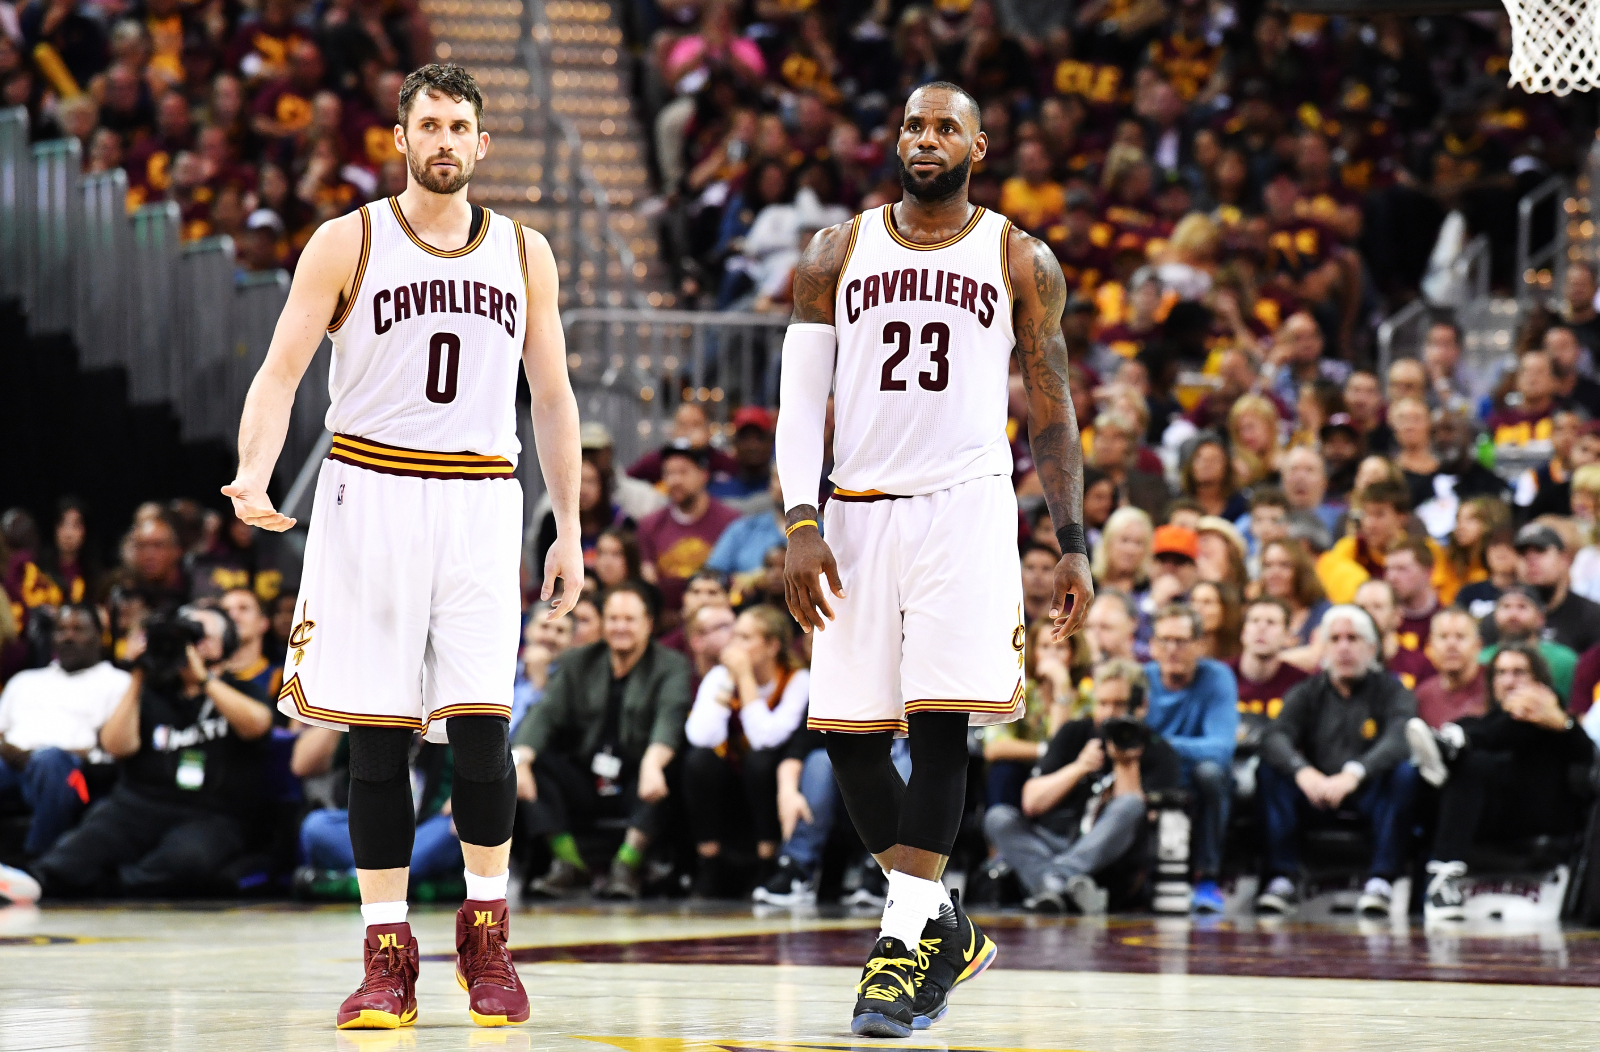 Kevin Love was absolutely dominant on the Timberwolves. However, he had to change everything to play with LeBron James on the Cavaliers.